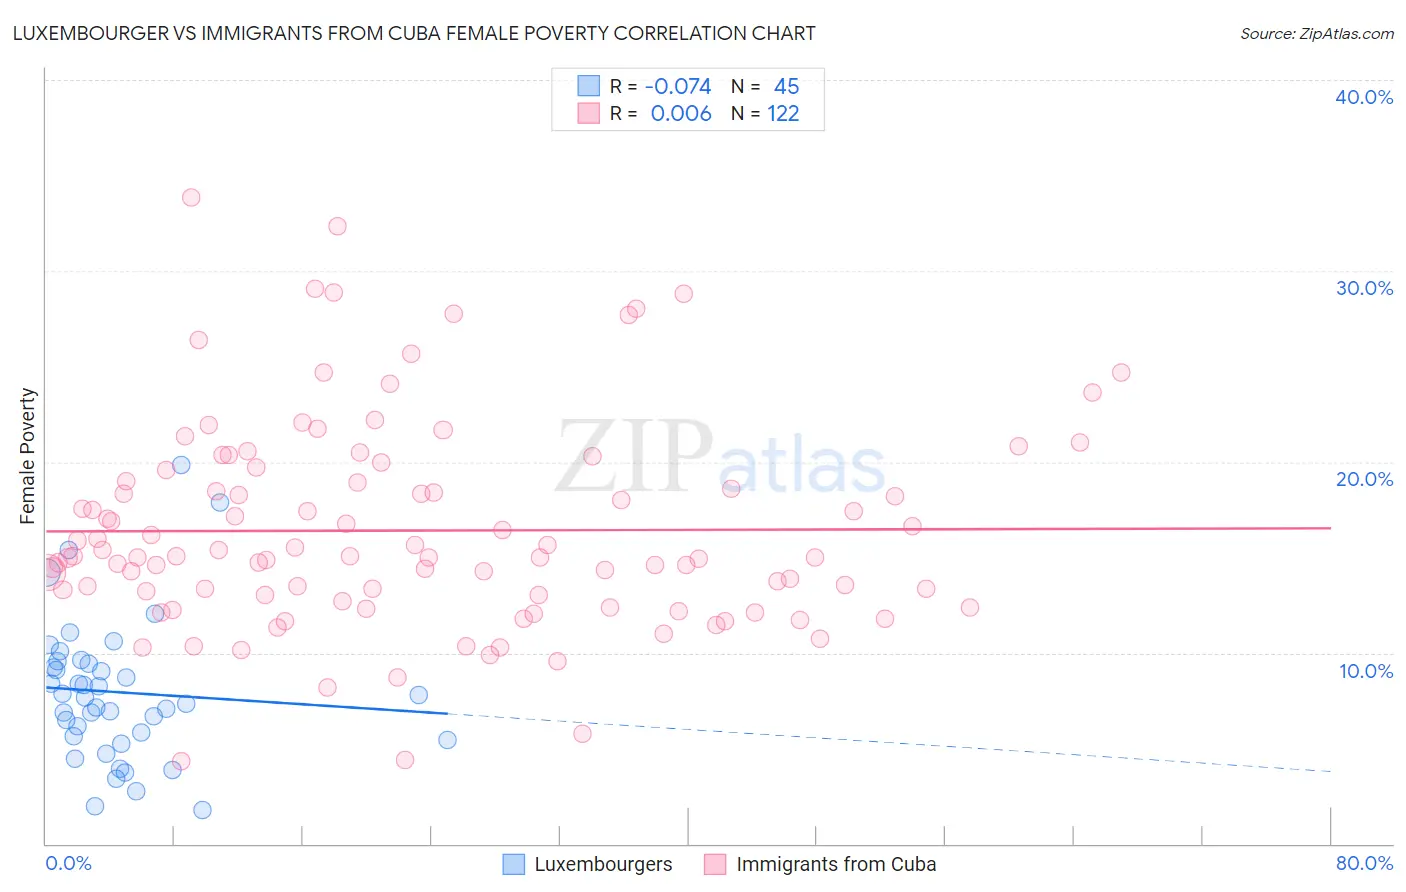 Luxembourger vs Immigrants from Cuba Female Poverty